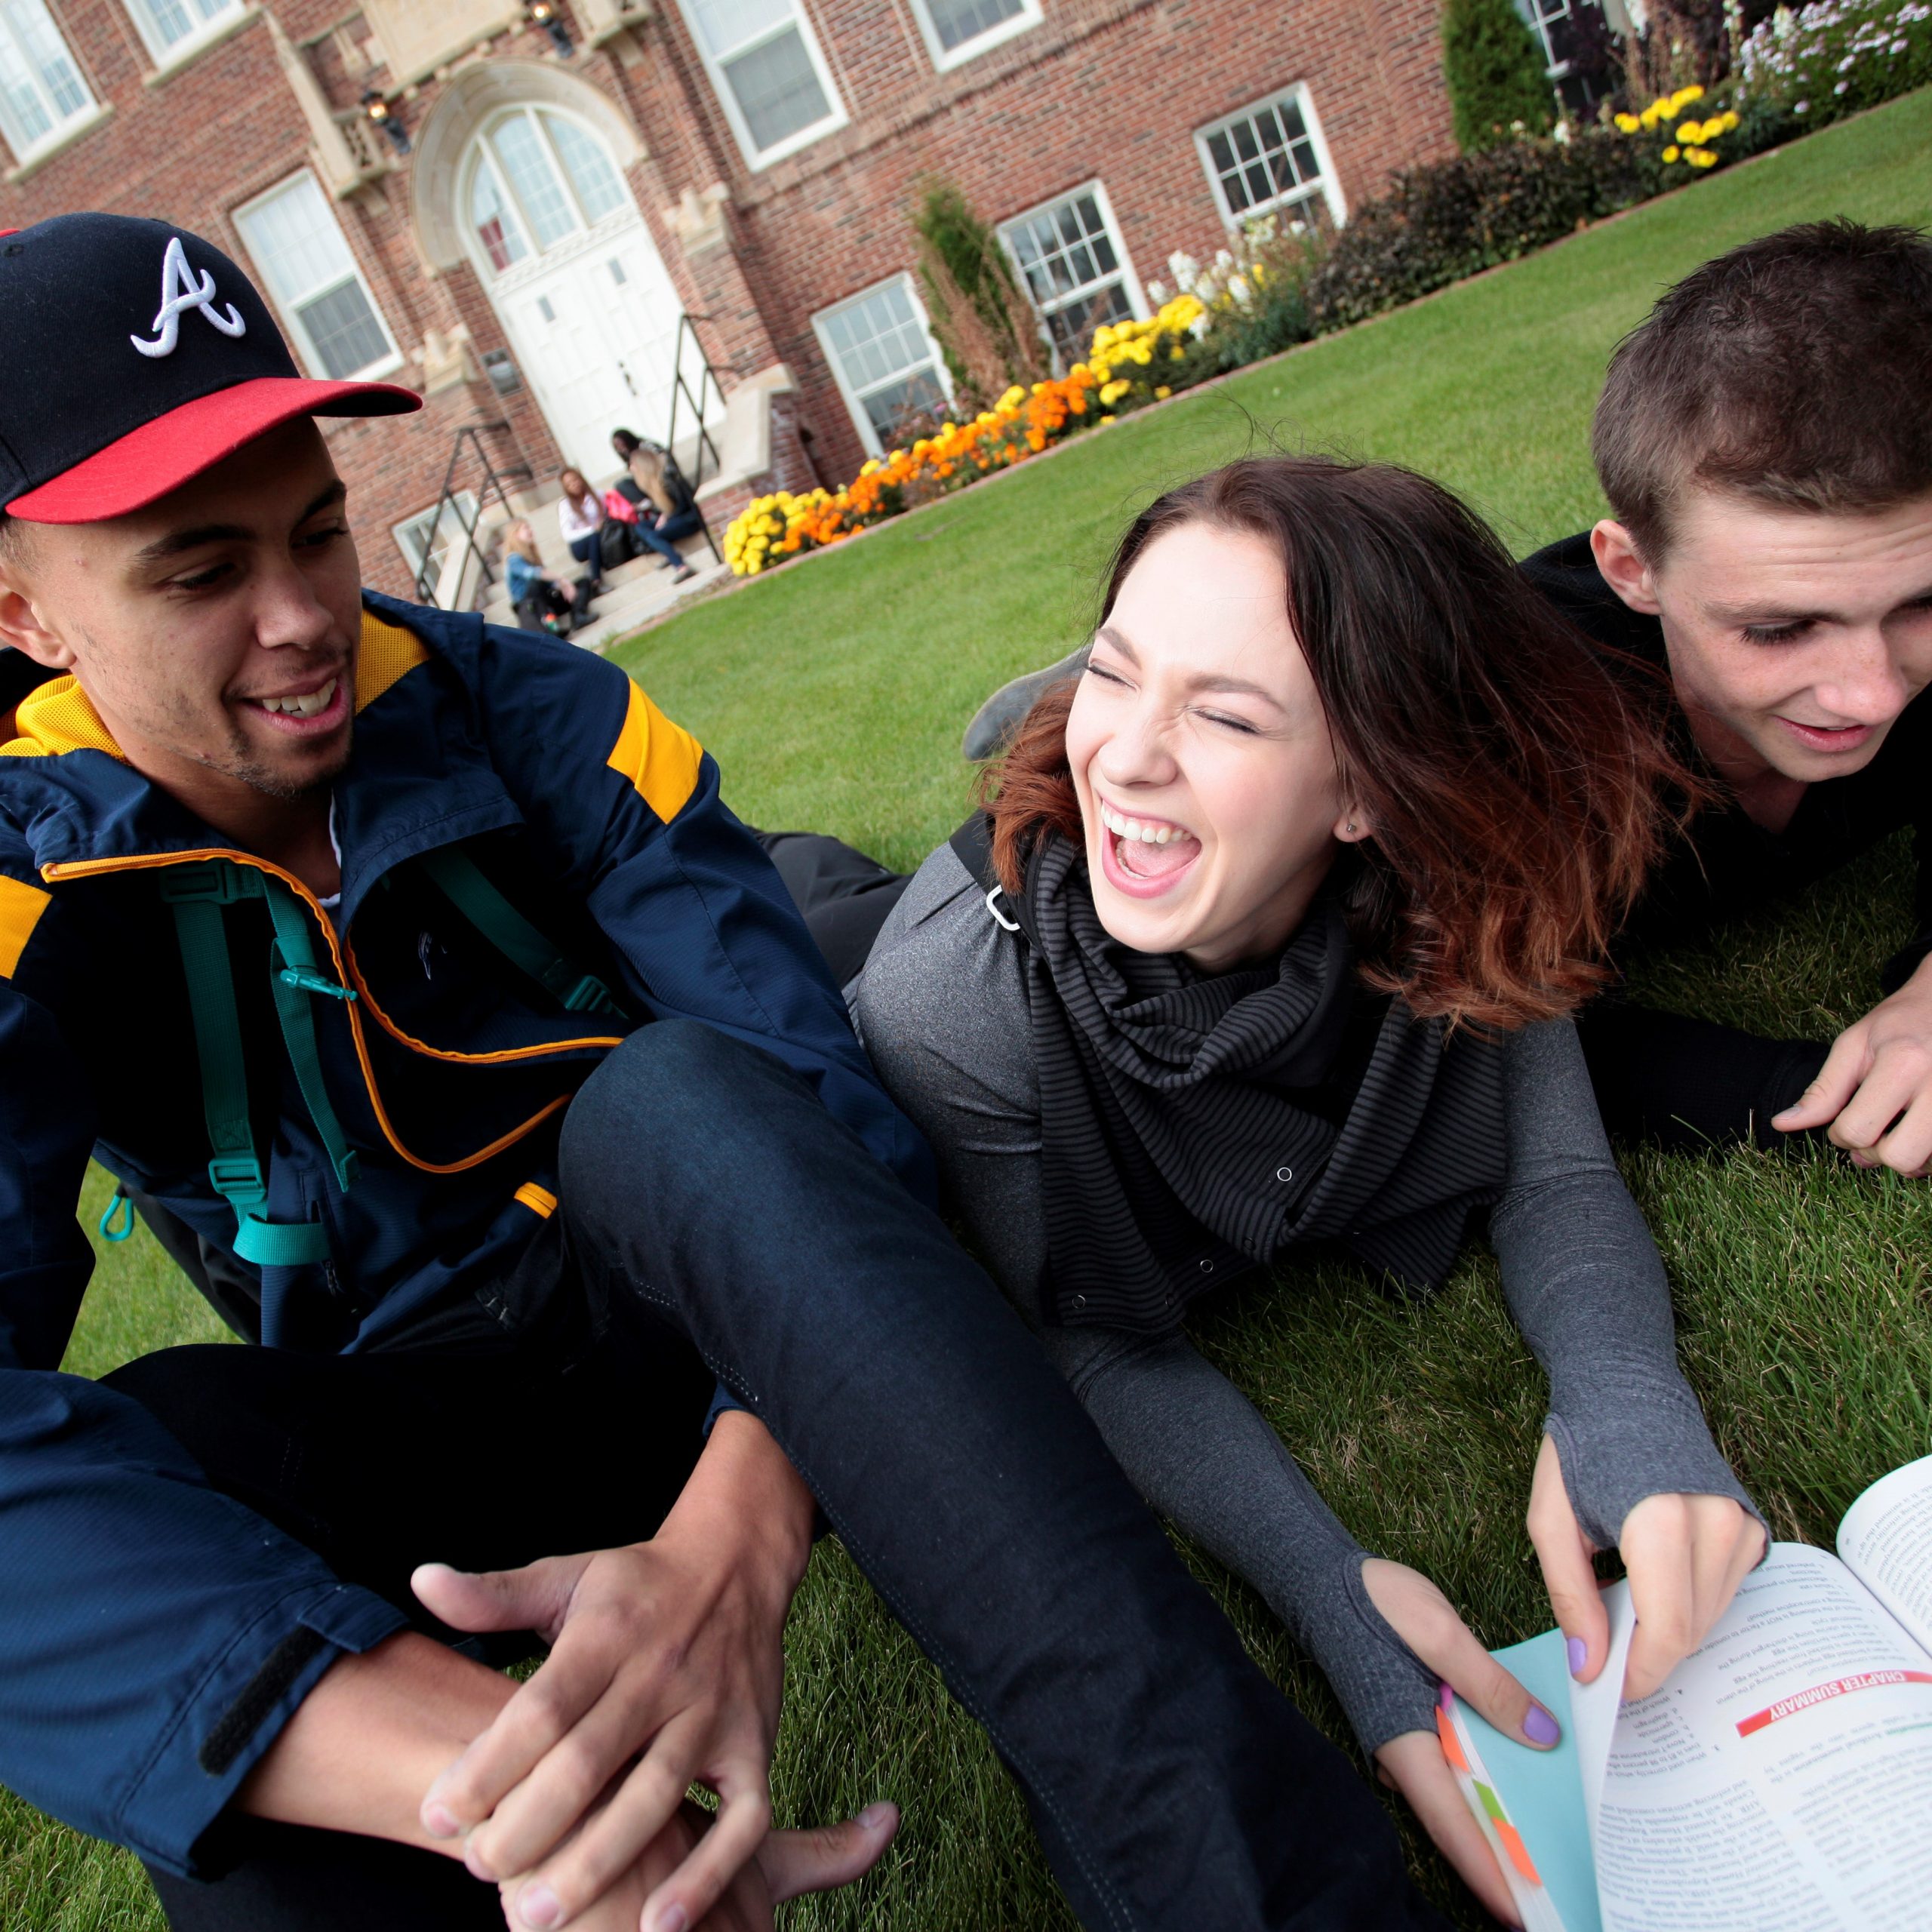 Students hanging out together on the front lawn of Concordia University of Edmonton.